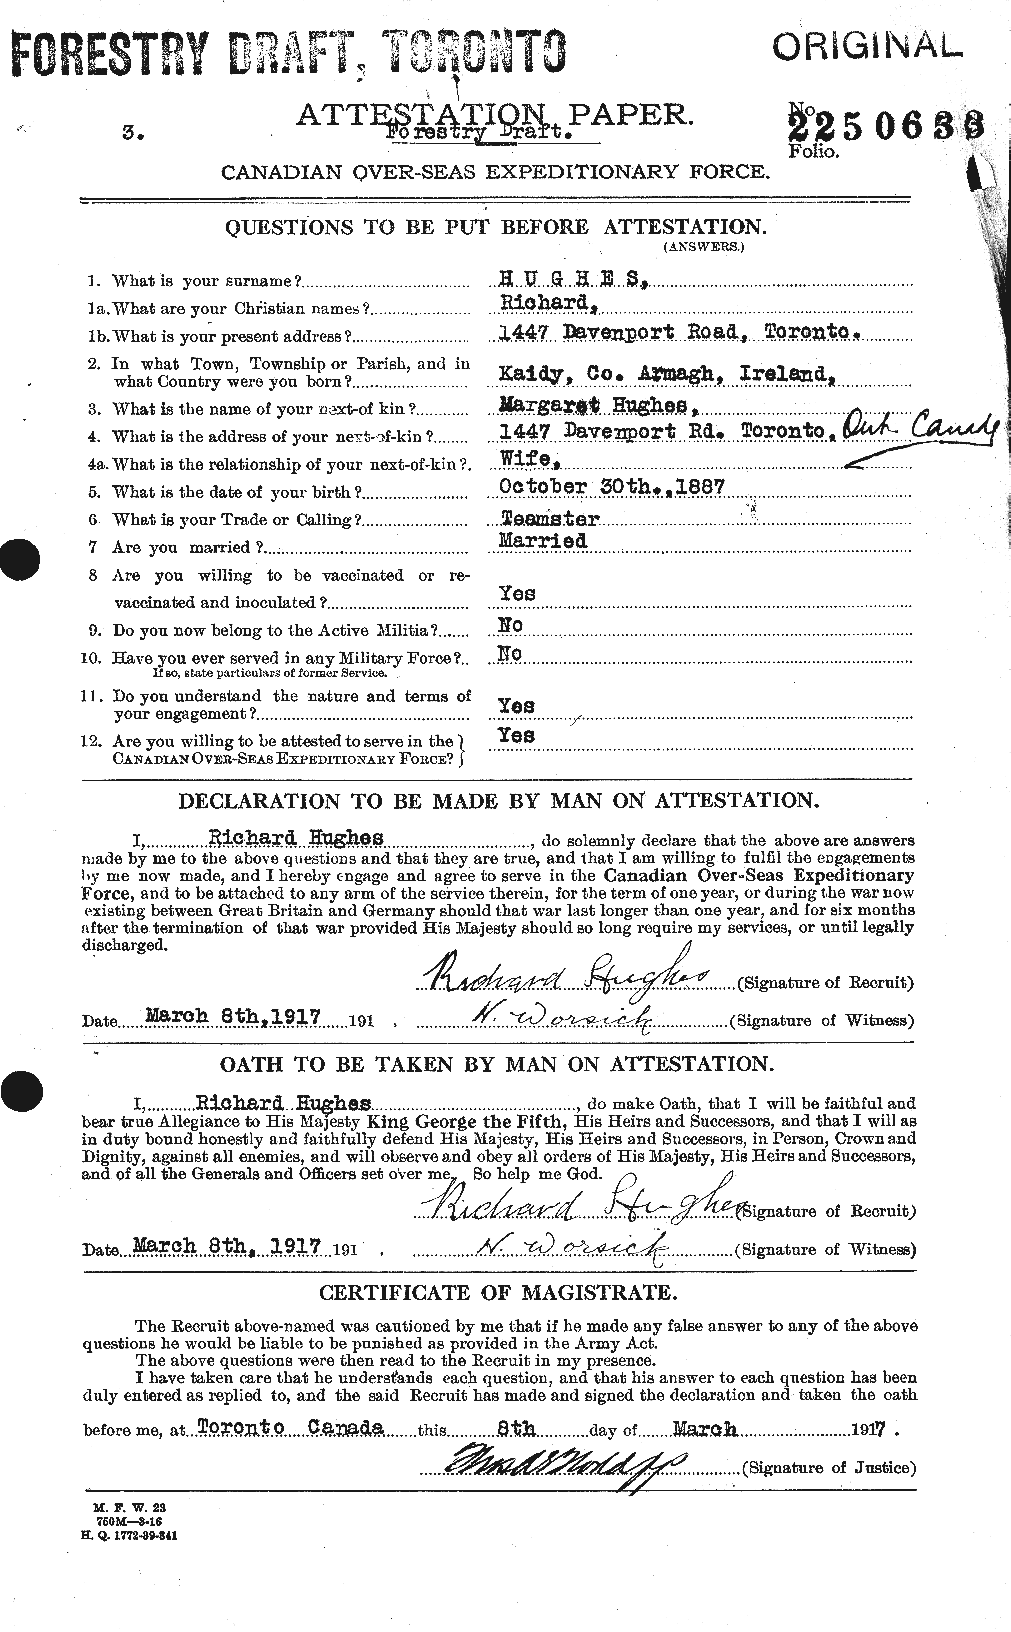 Personnel Records of the First World War - CEF 404180a